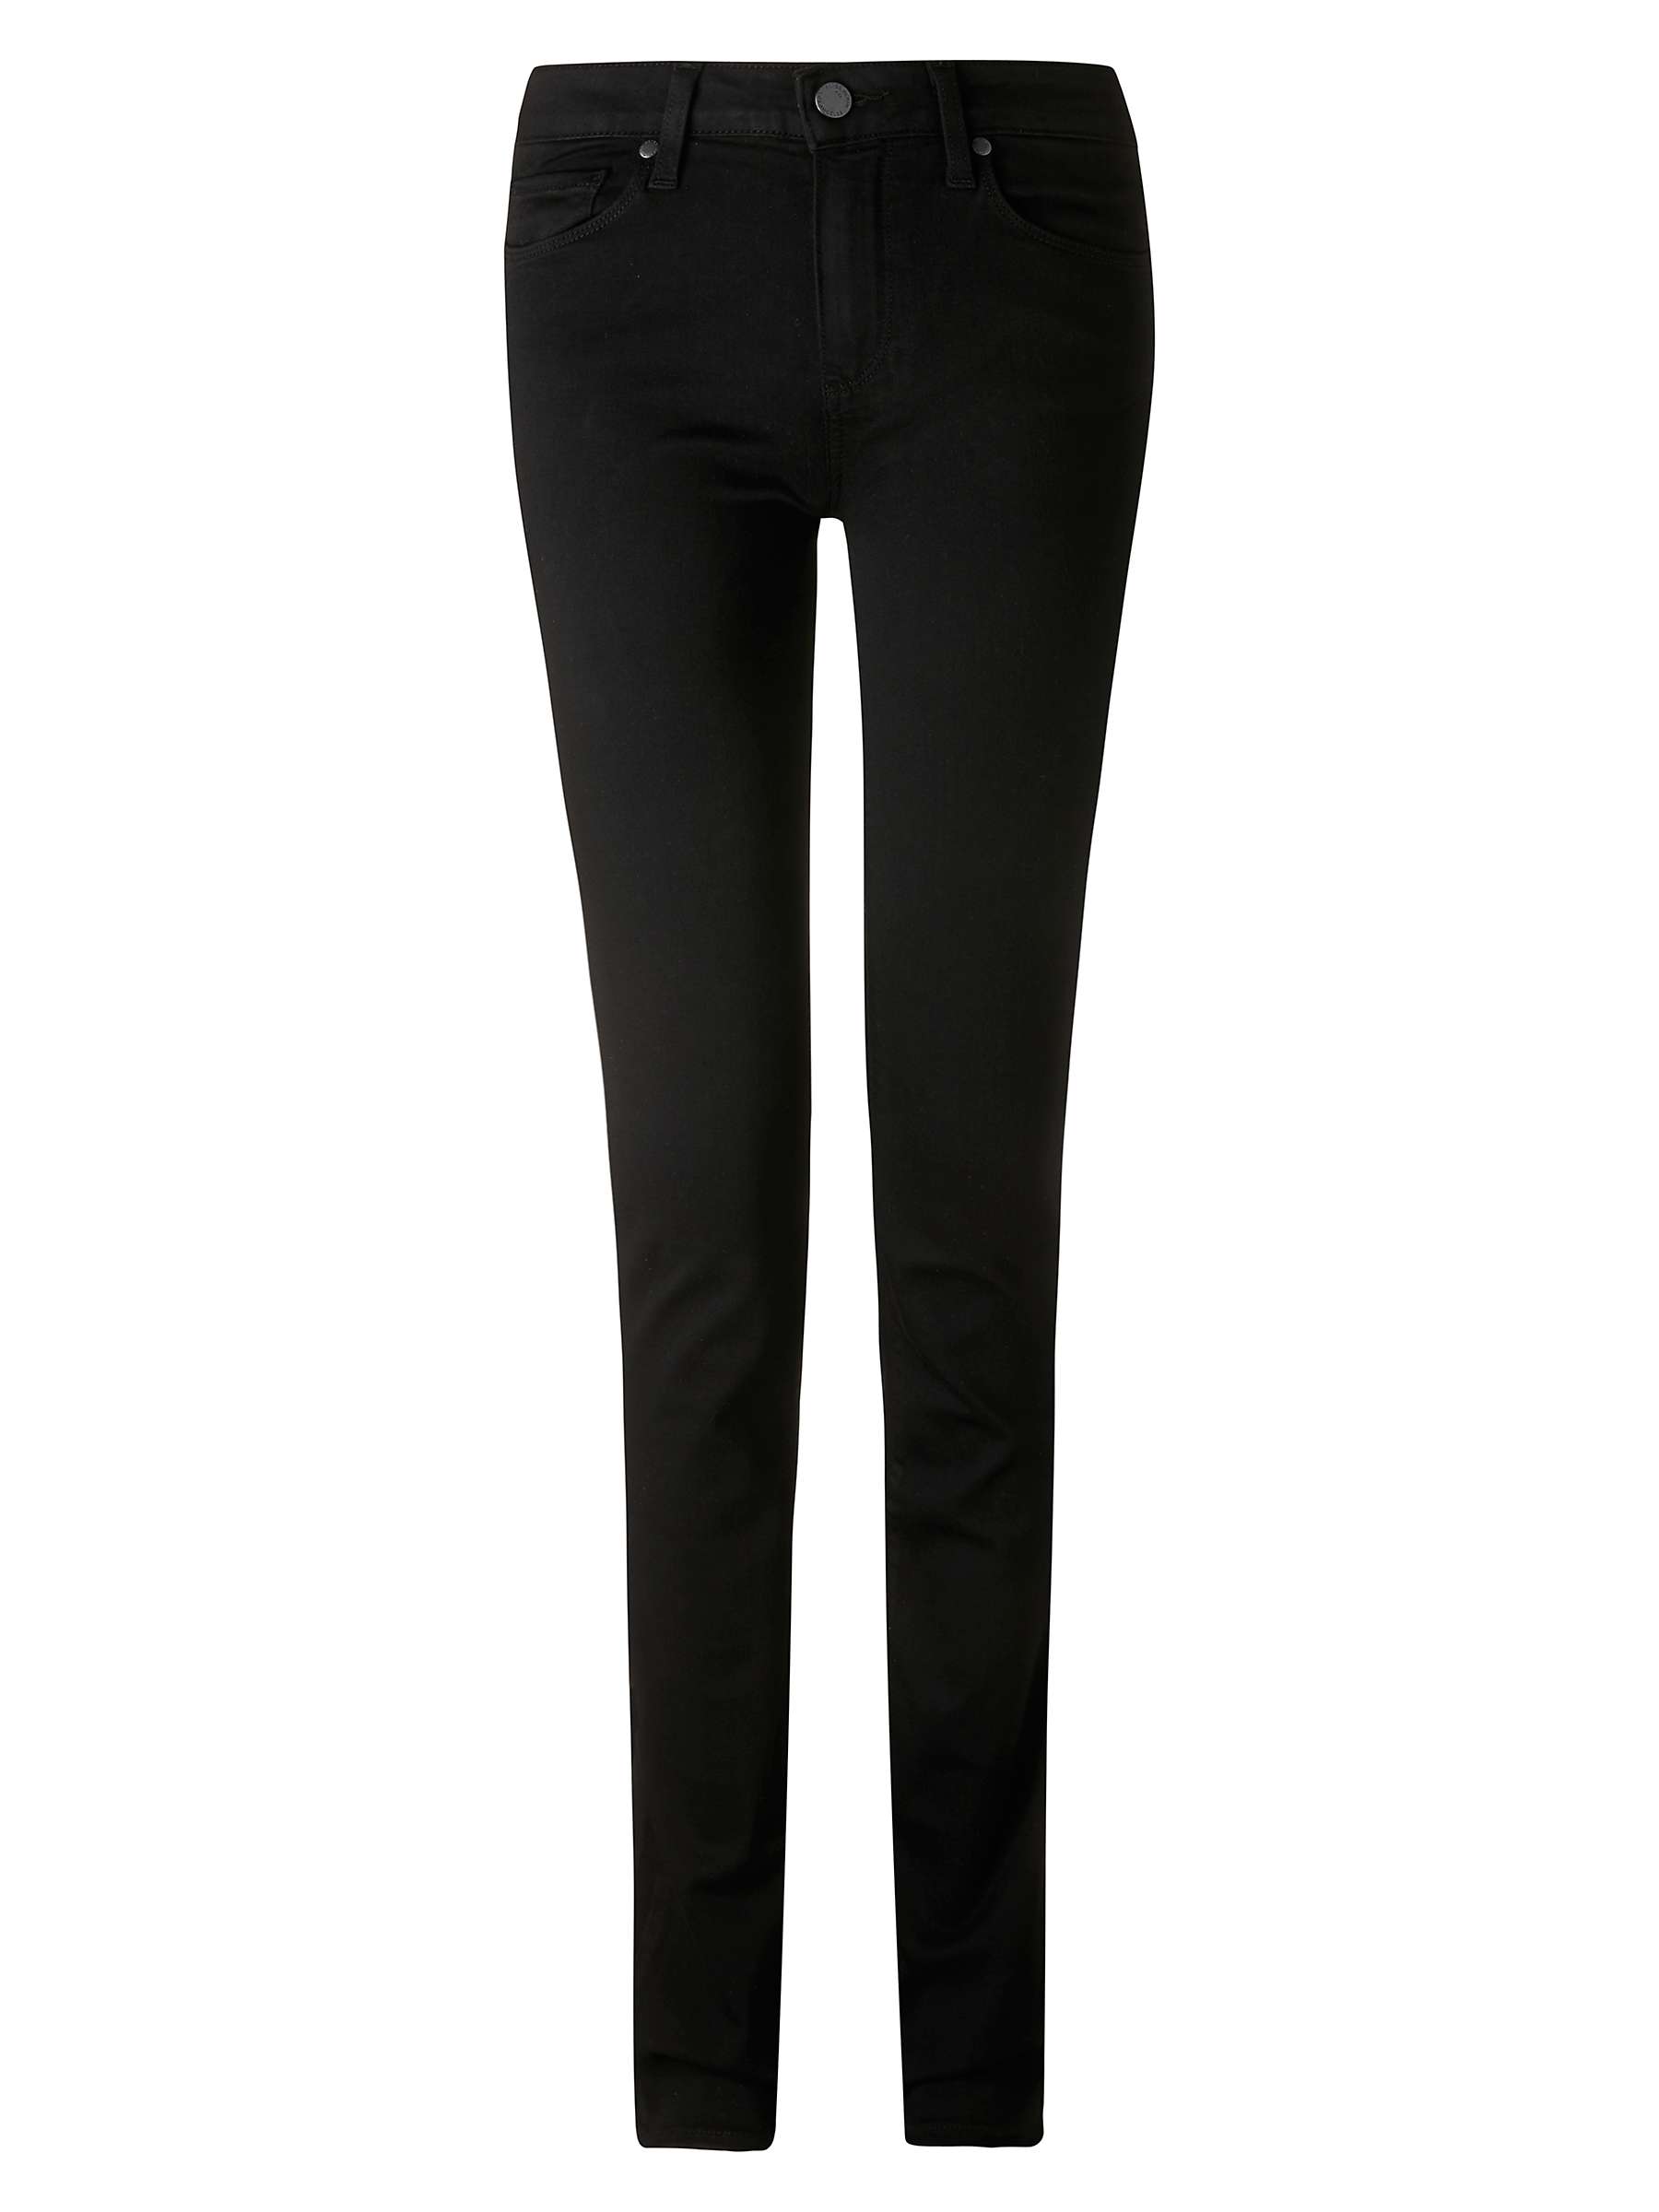 Buy PAIGE Hoxton Straight Leg Jeans, Black Shadow Online at johnlewis.com